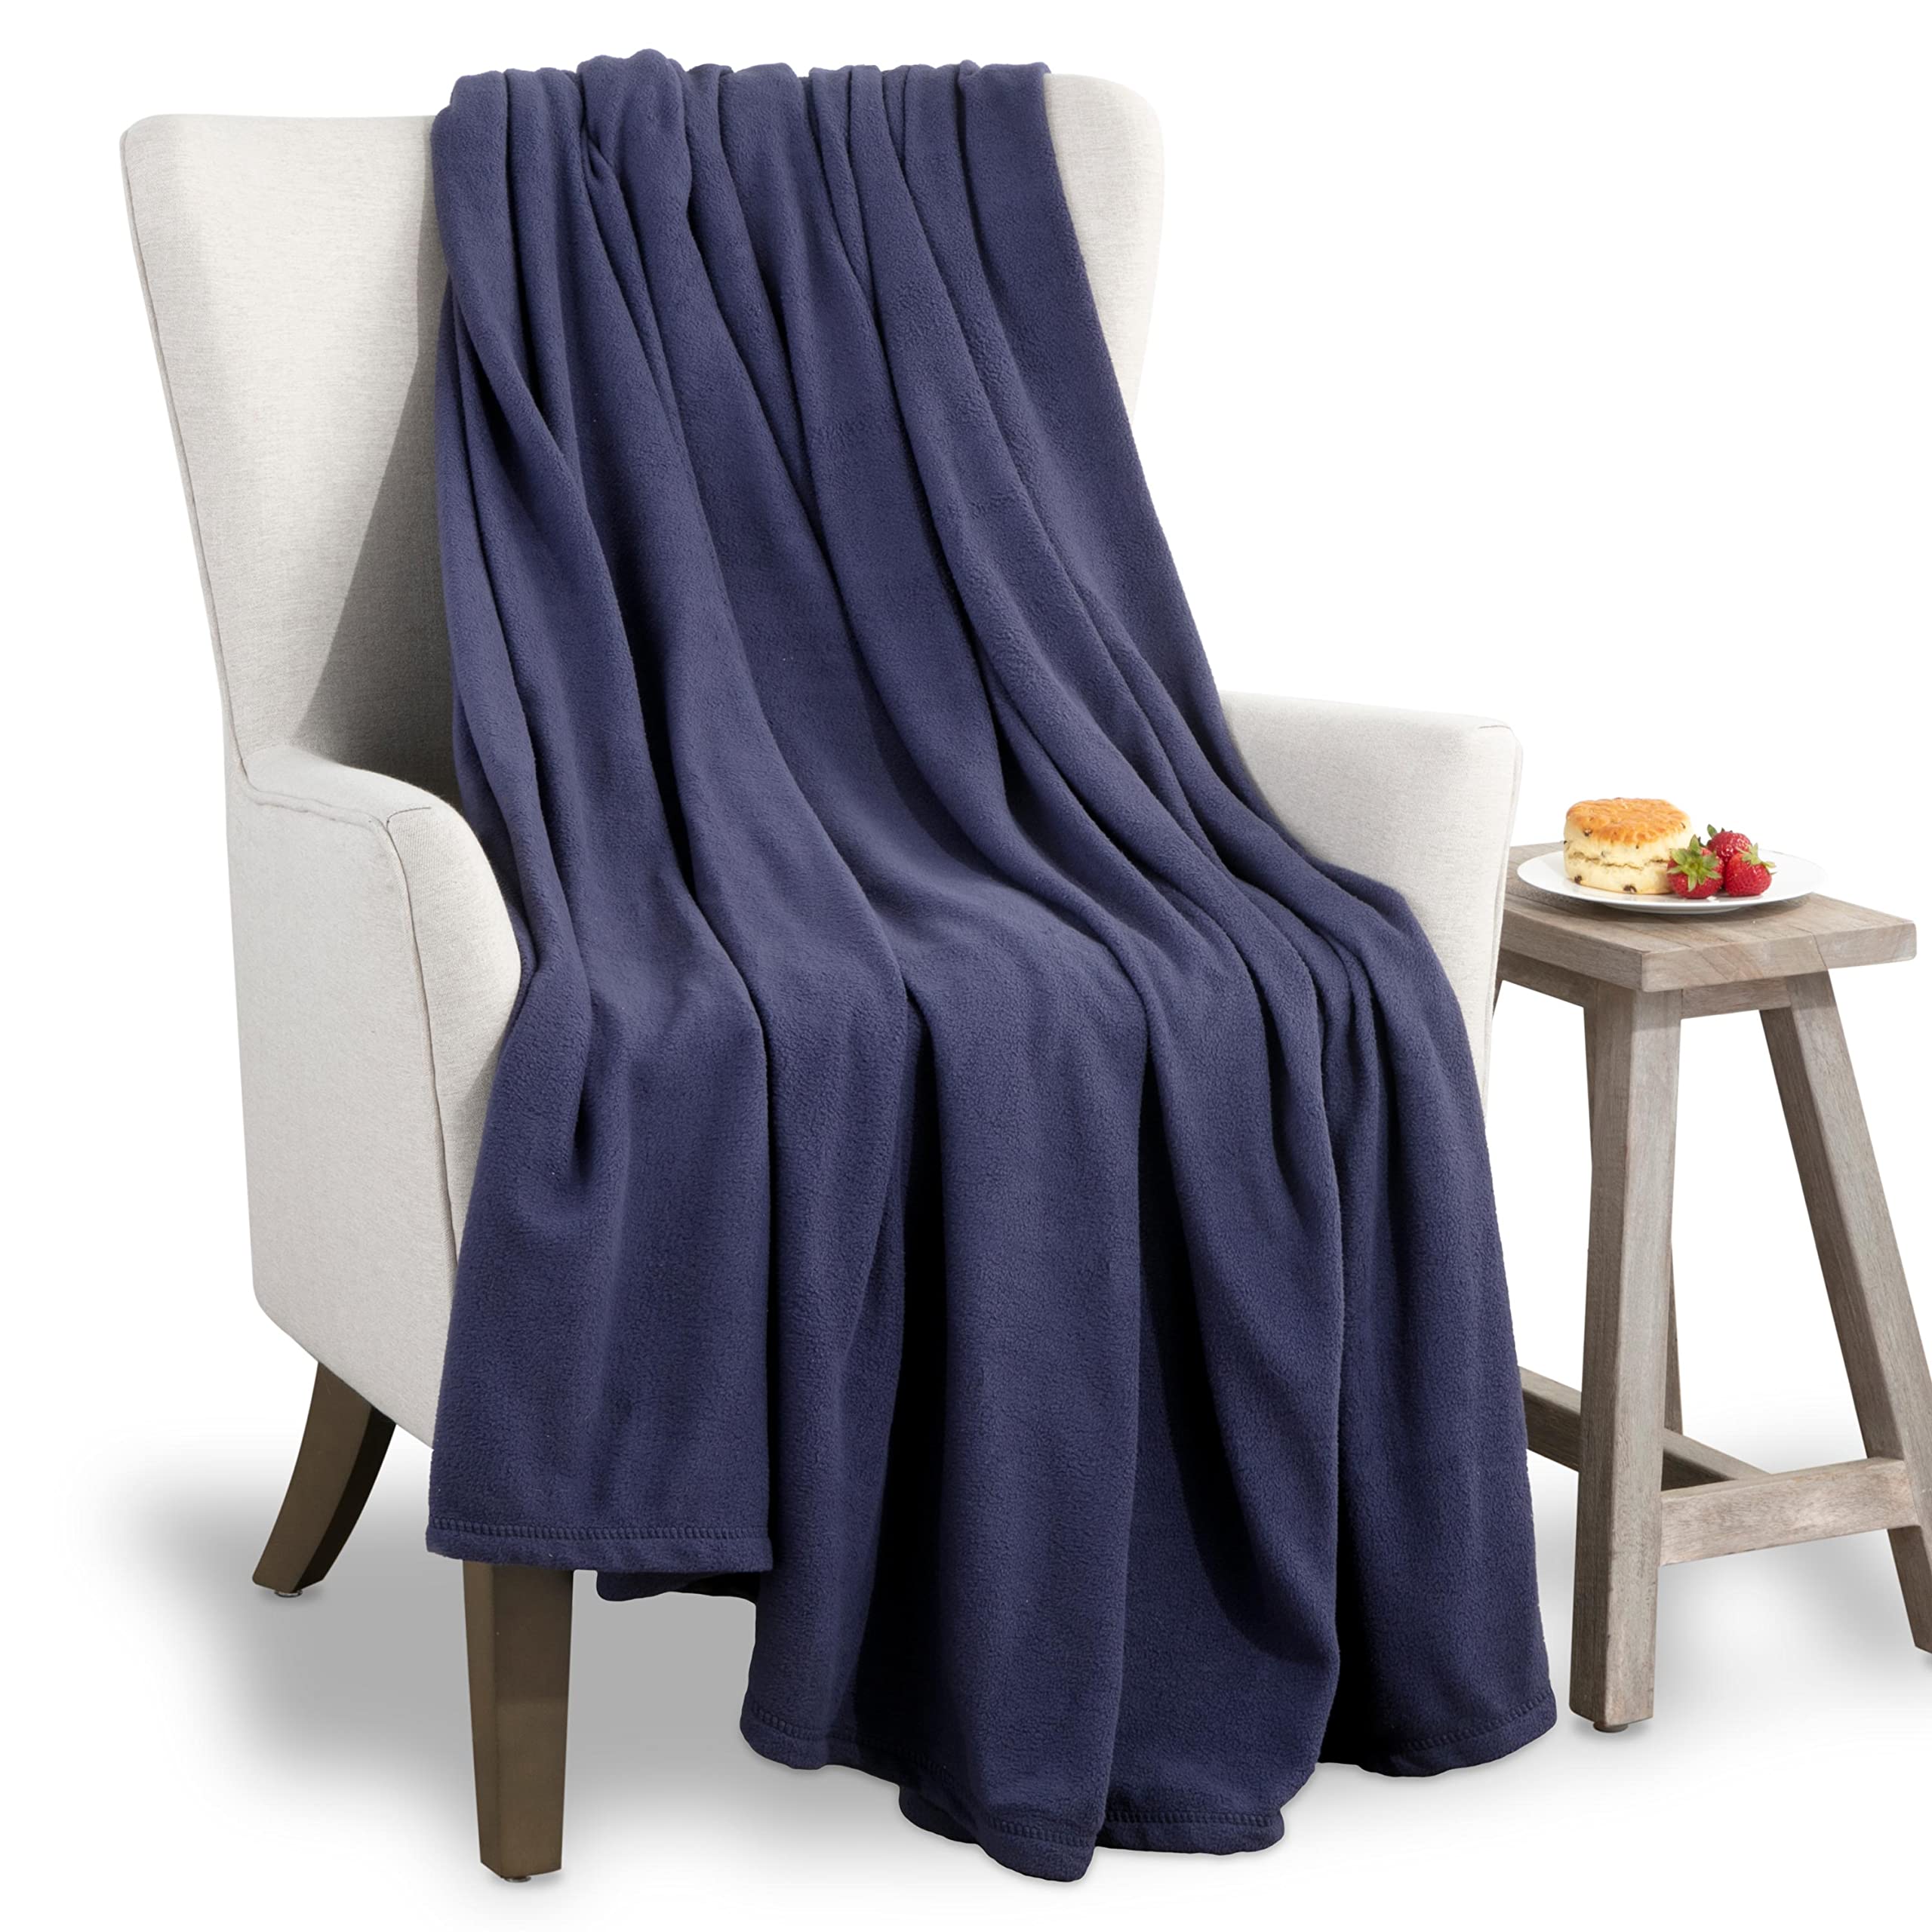 Book Cover Martex Fleece Blanket Twin Size - Fleece Bed Blanket - All Season Warm Lightweight Super Soft Anti Static Throw Blanket - Navy Blanket - Hotel Quality- Blanket For Couch (66x90 Inches, Navy) Navy Twin